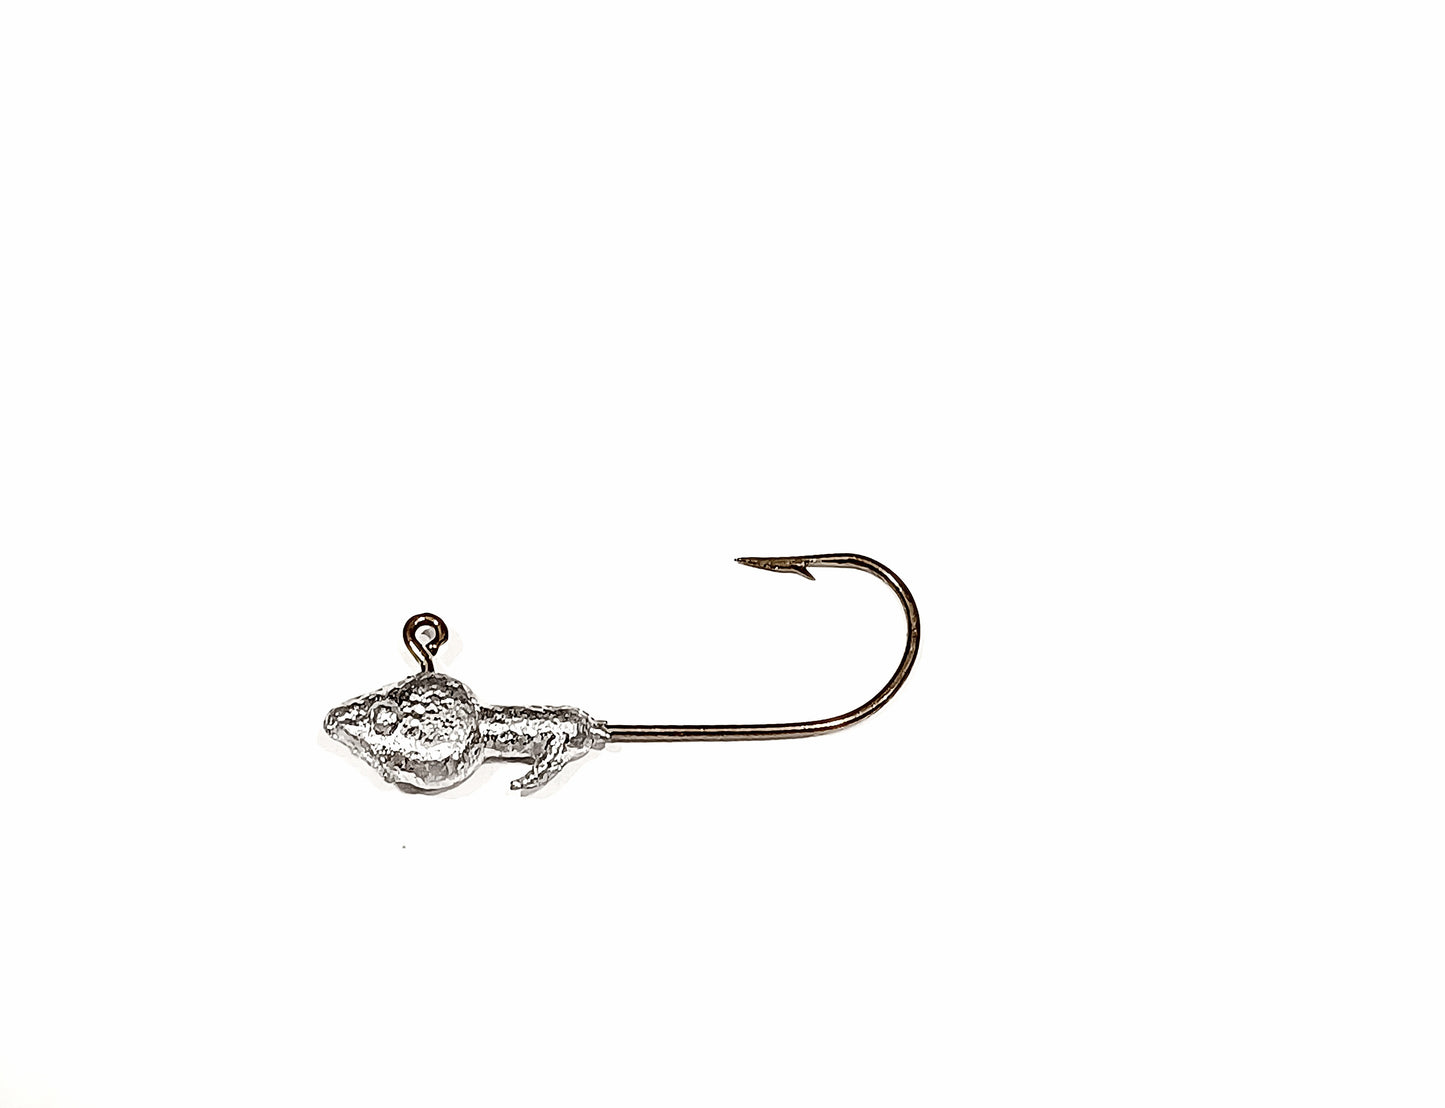 Finesse Minnow Jig Heads (size: 1/32oz) our ultra light line series tackle